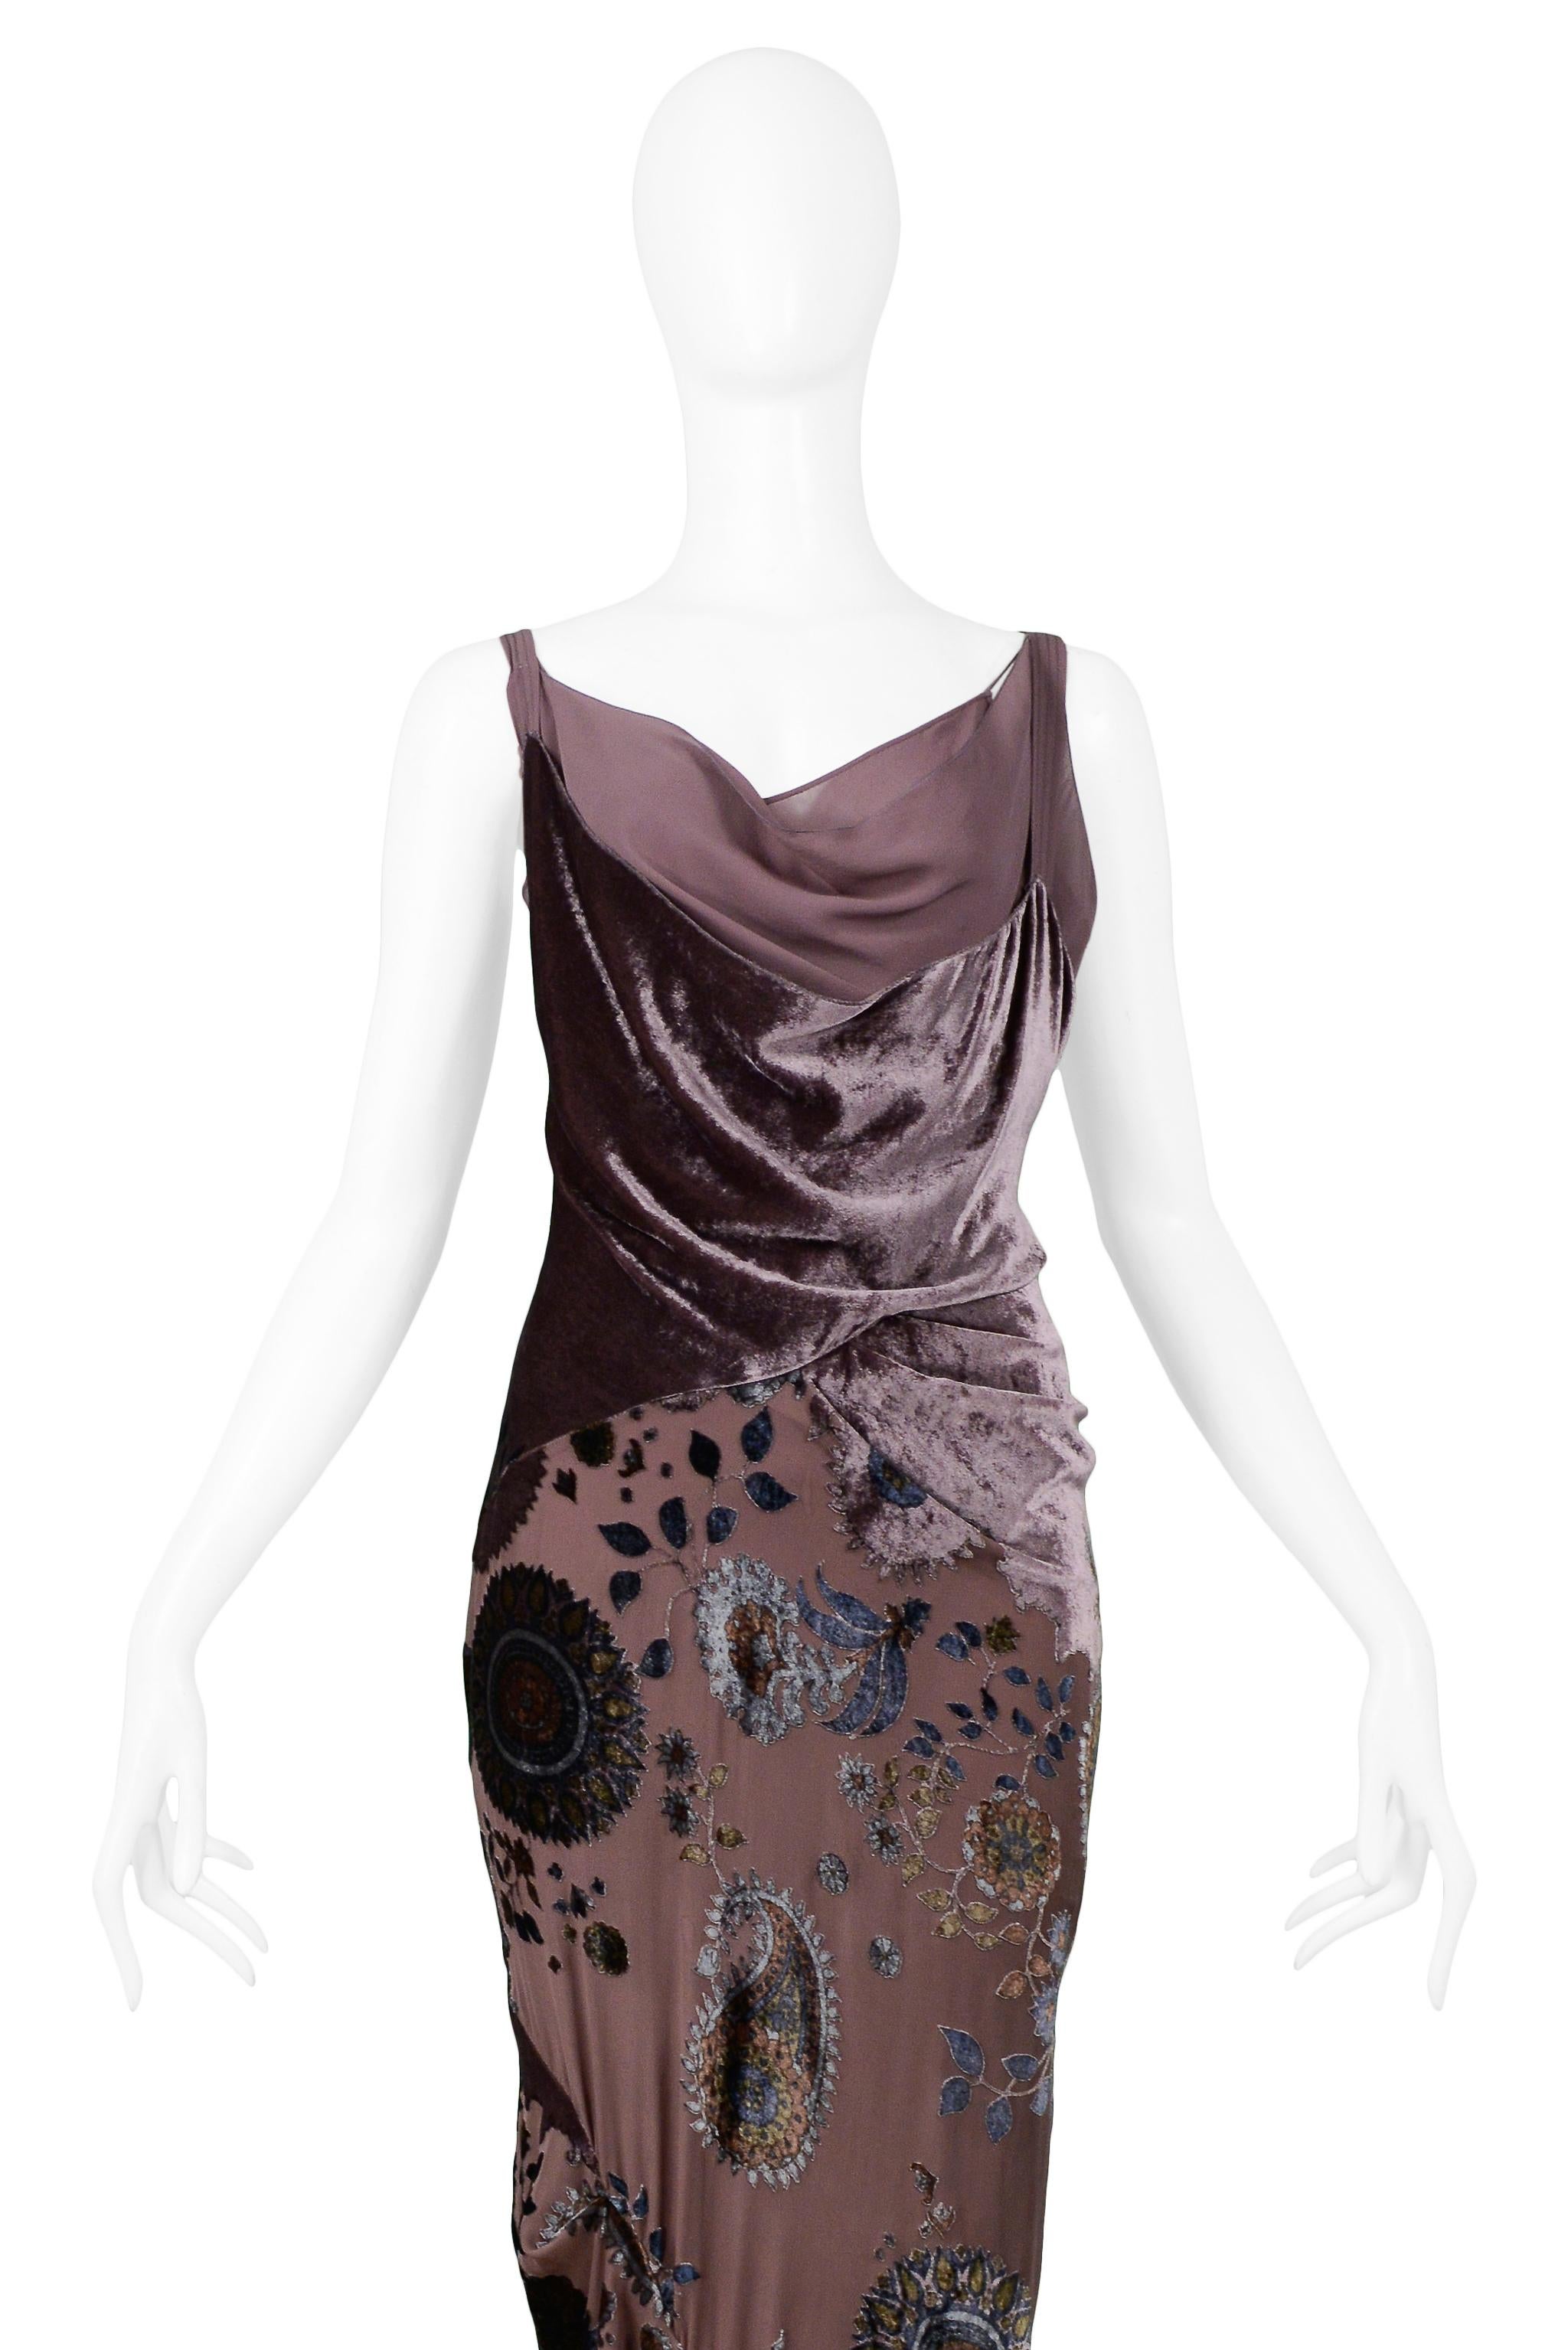 Christian Dior Taupe Velvet Floral Devore Gown 2005 In Excellent Condition For Sale In Los Angeles, CA